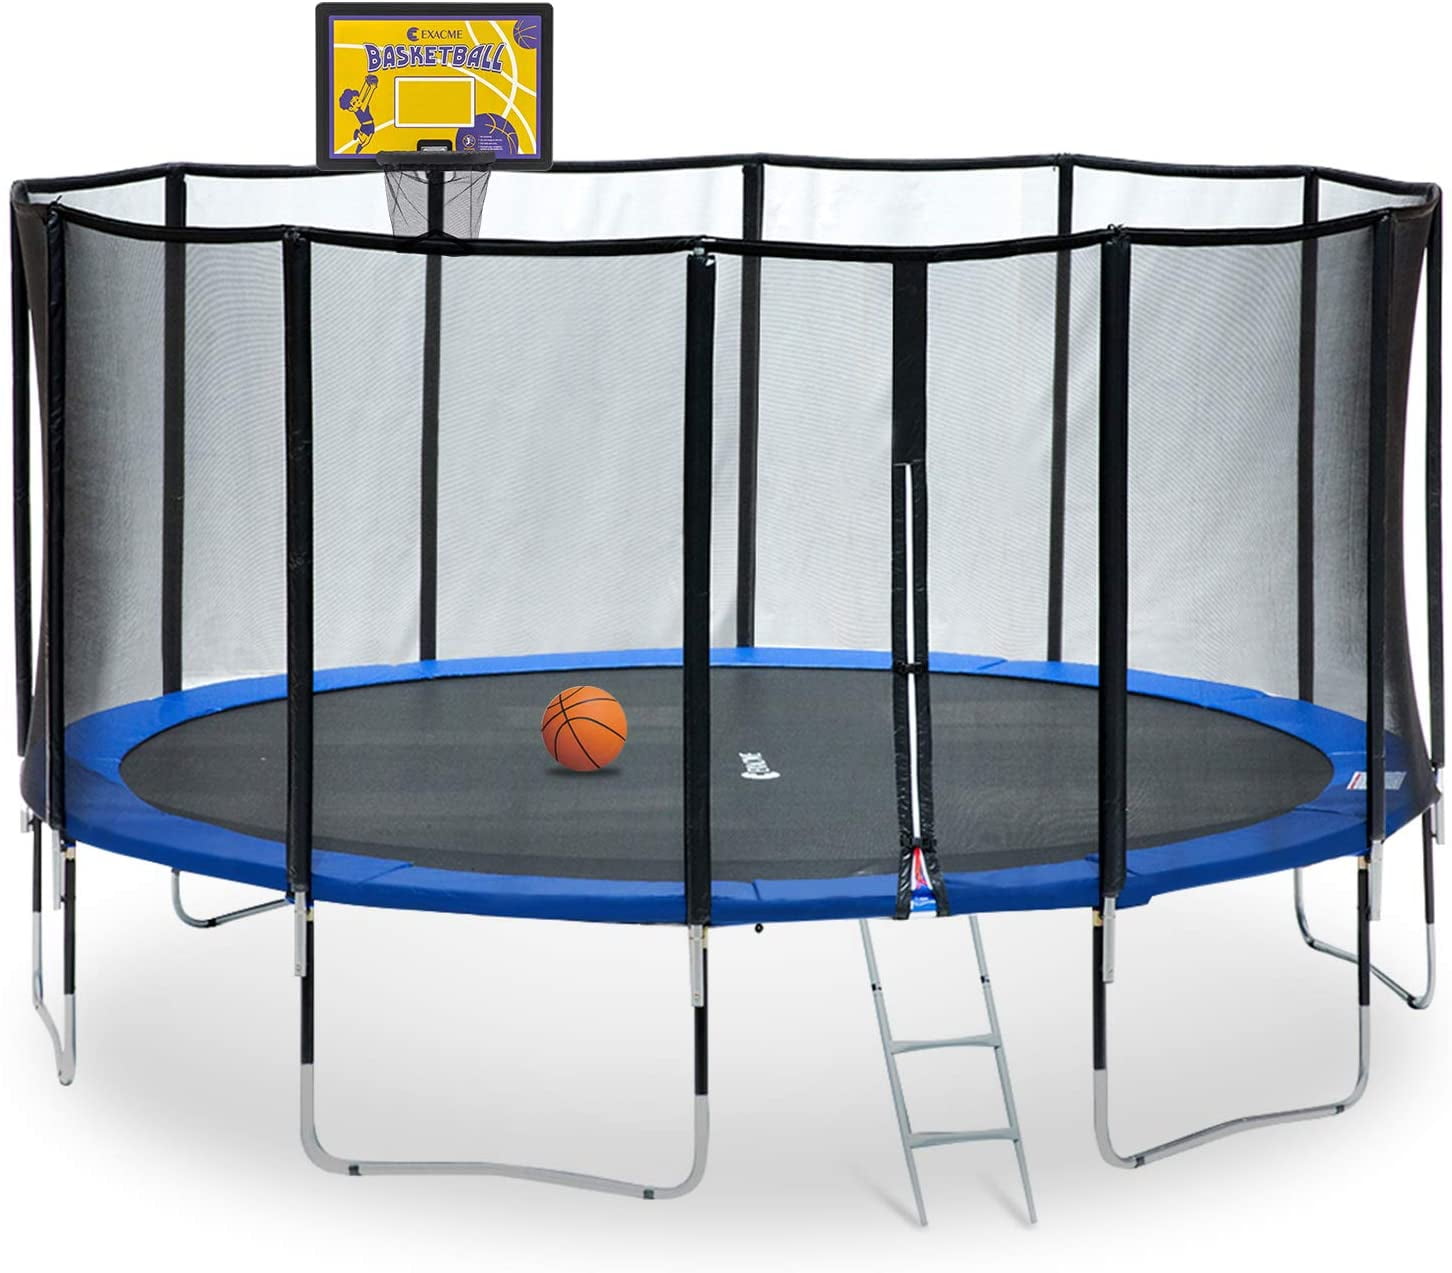 Exacme 15 Foot Outdoor Round Trampoline 400 LBS Weight Limit with Rectangular Basketball Hoop, Yellow, L15+BH07YE